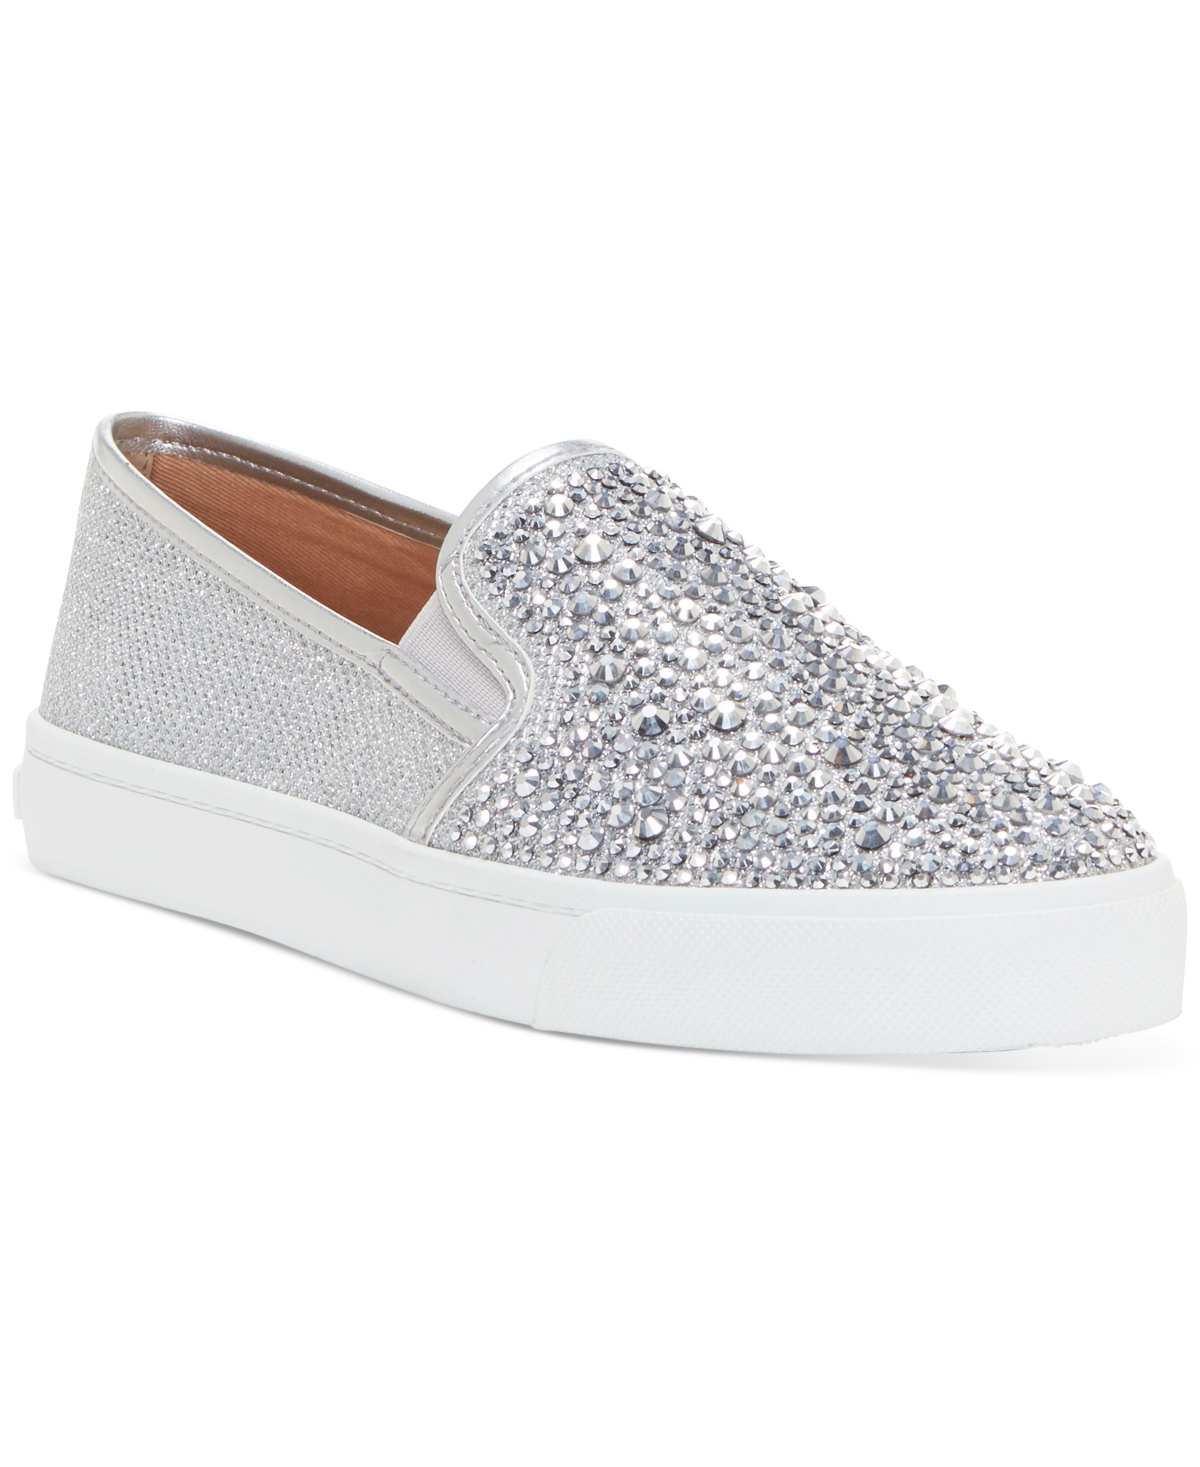 Inc International Concepts Sammee Slip-On Sneakers, Created for Macy's Women's Shoes